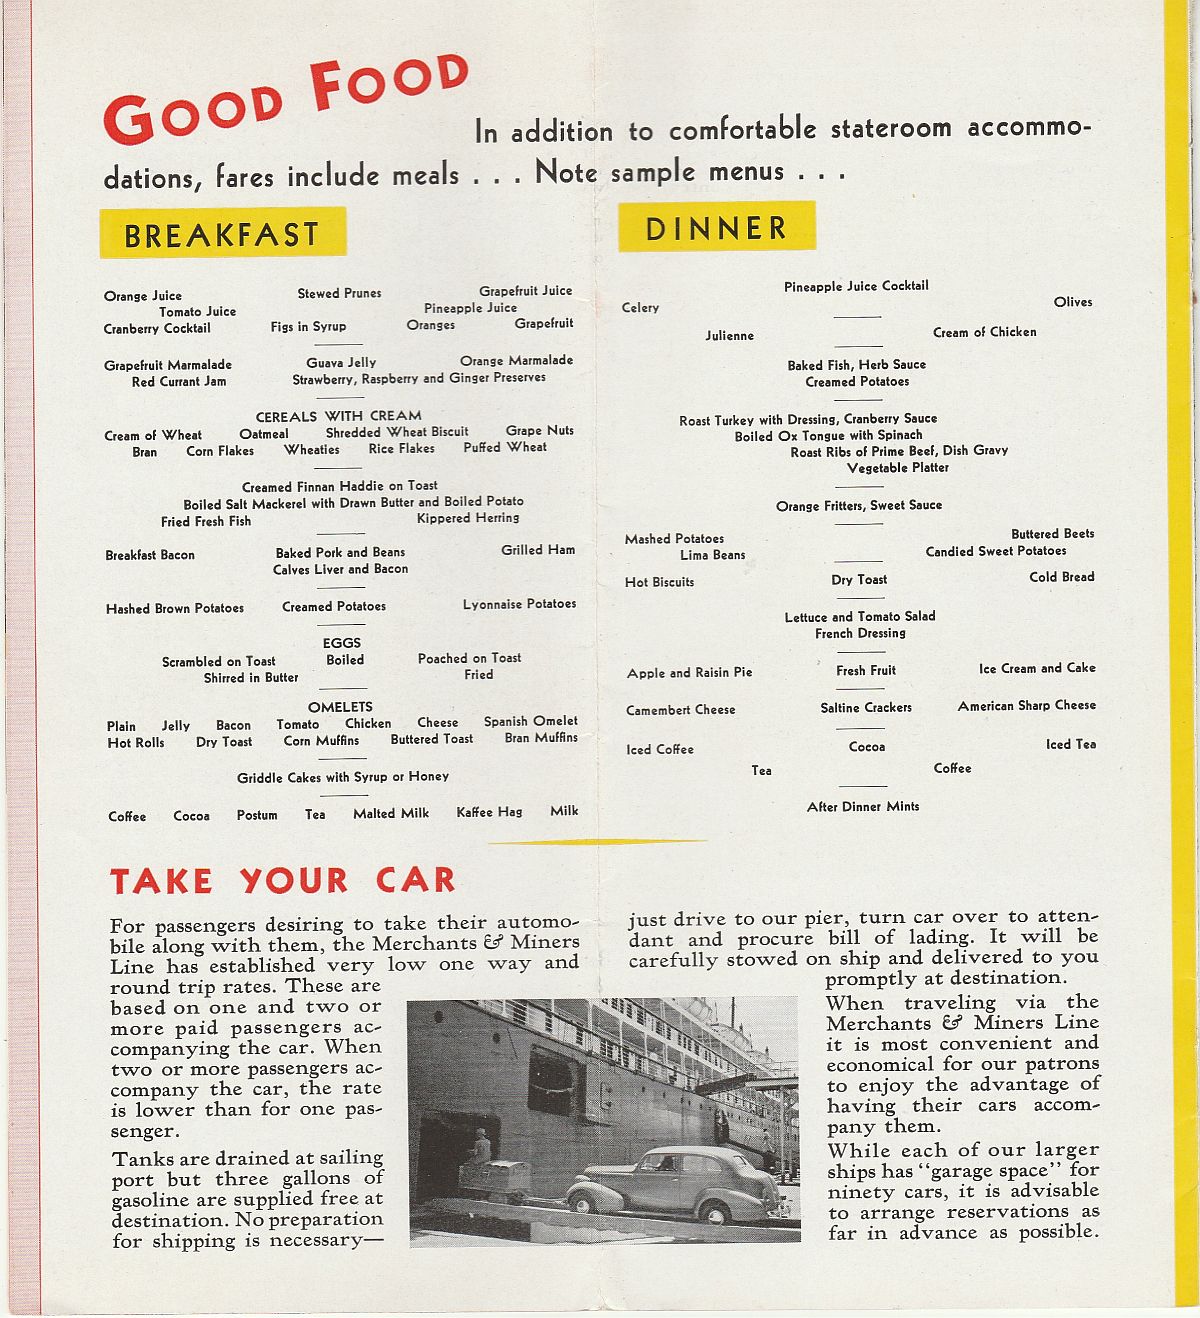 Merchants and Miners Line Good food: Fares include meals. Sample breakfast and dinner menus / take your car